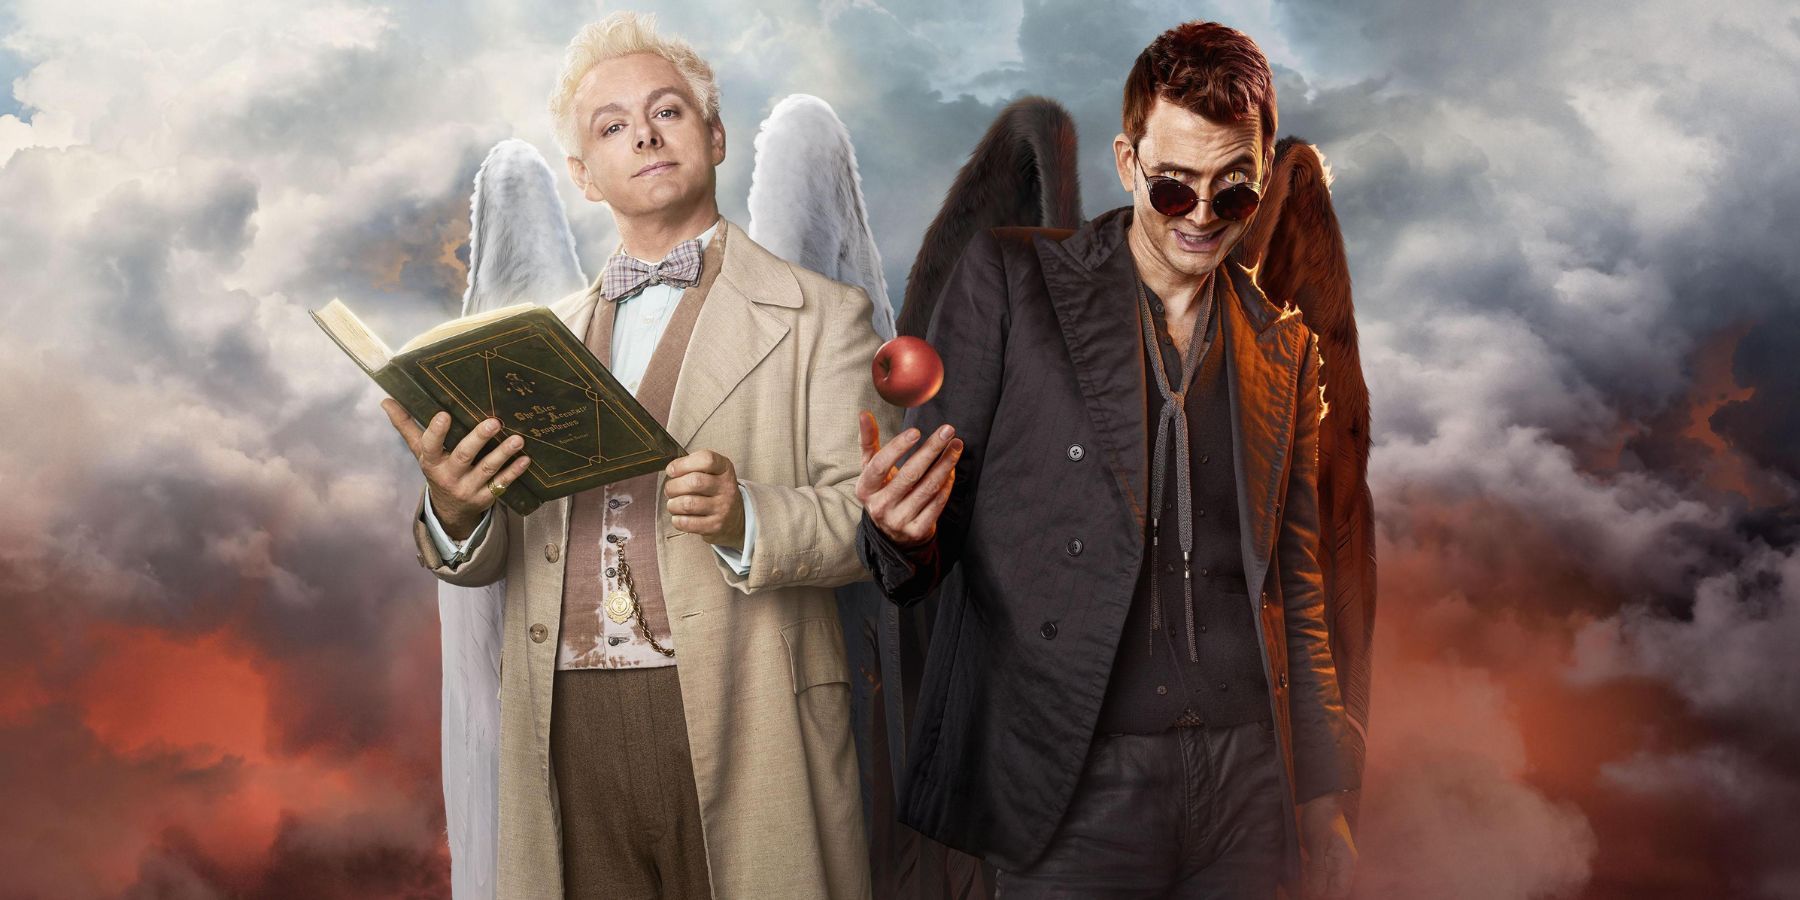 David Tennant and Michael Sheen as a demon and an angel in the adaptation of Good Omens